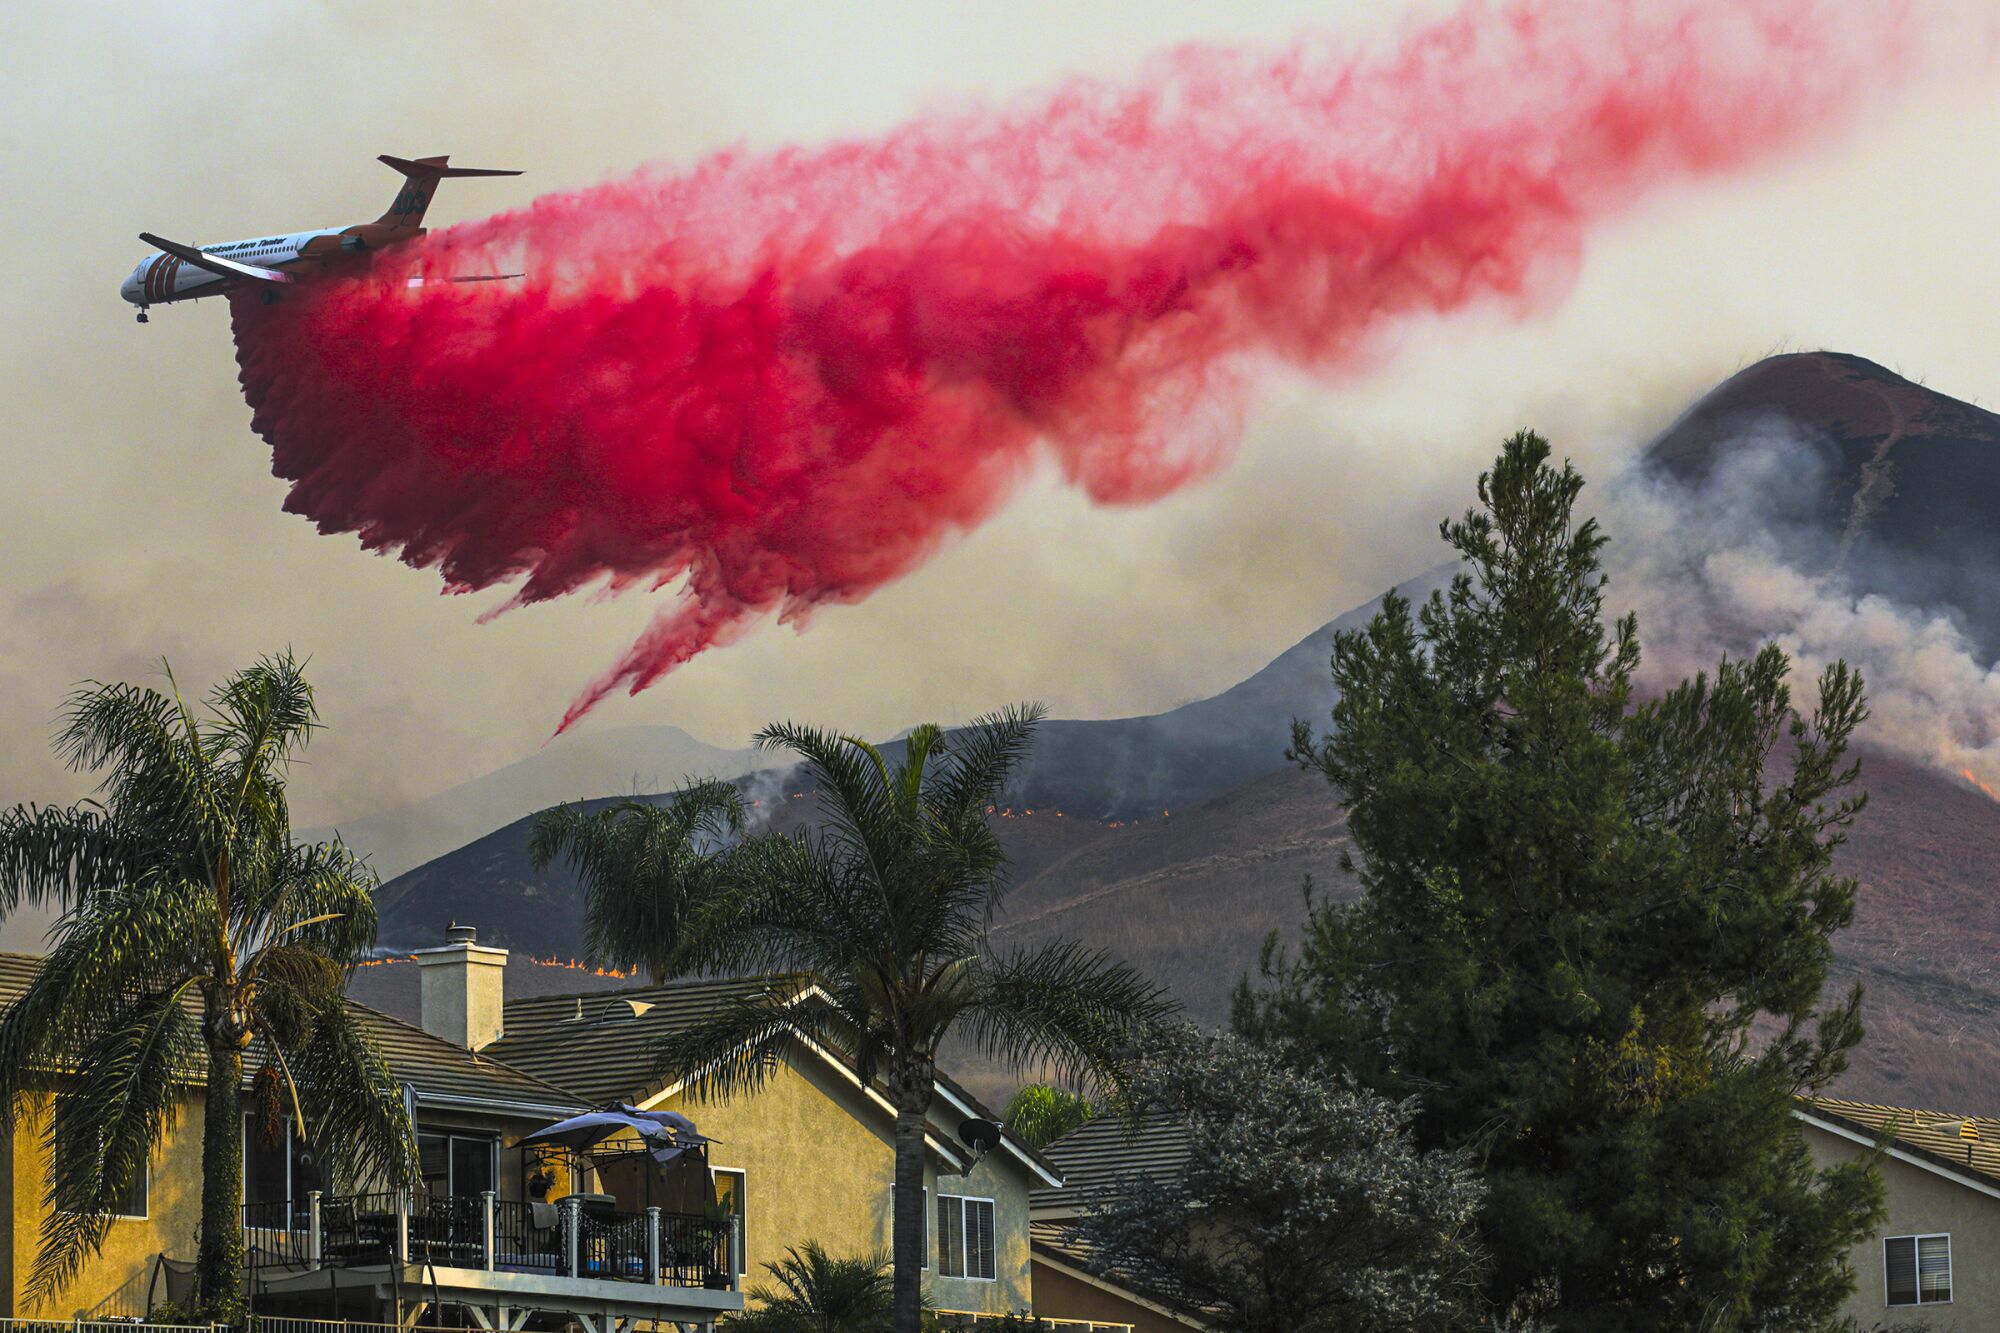 An air tanker fighting the Blue Ridge fire makes a fire retardant drop Tuesday behind homes in Chino Hills.